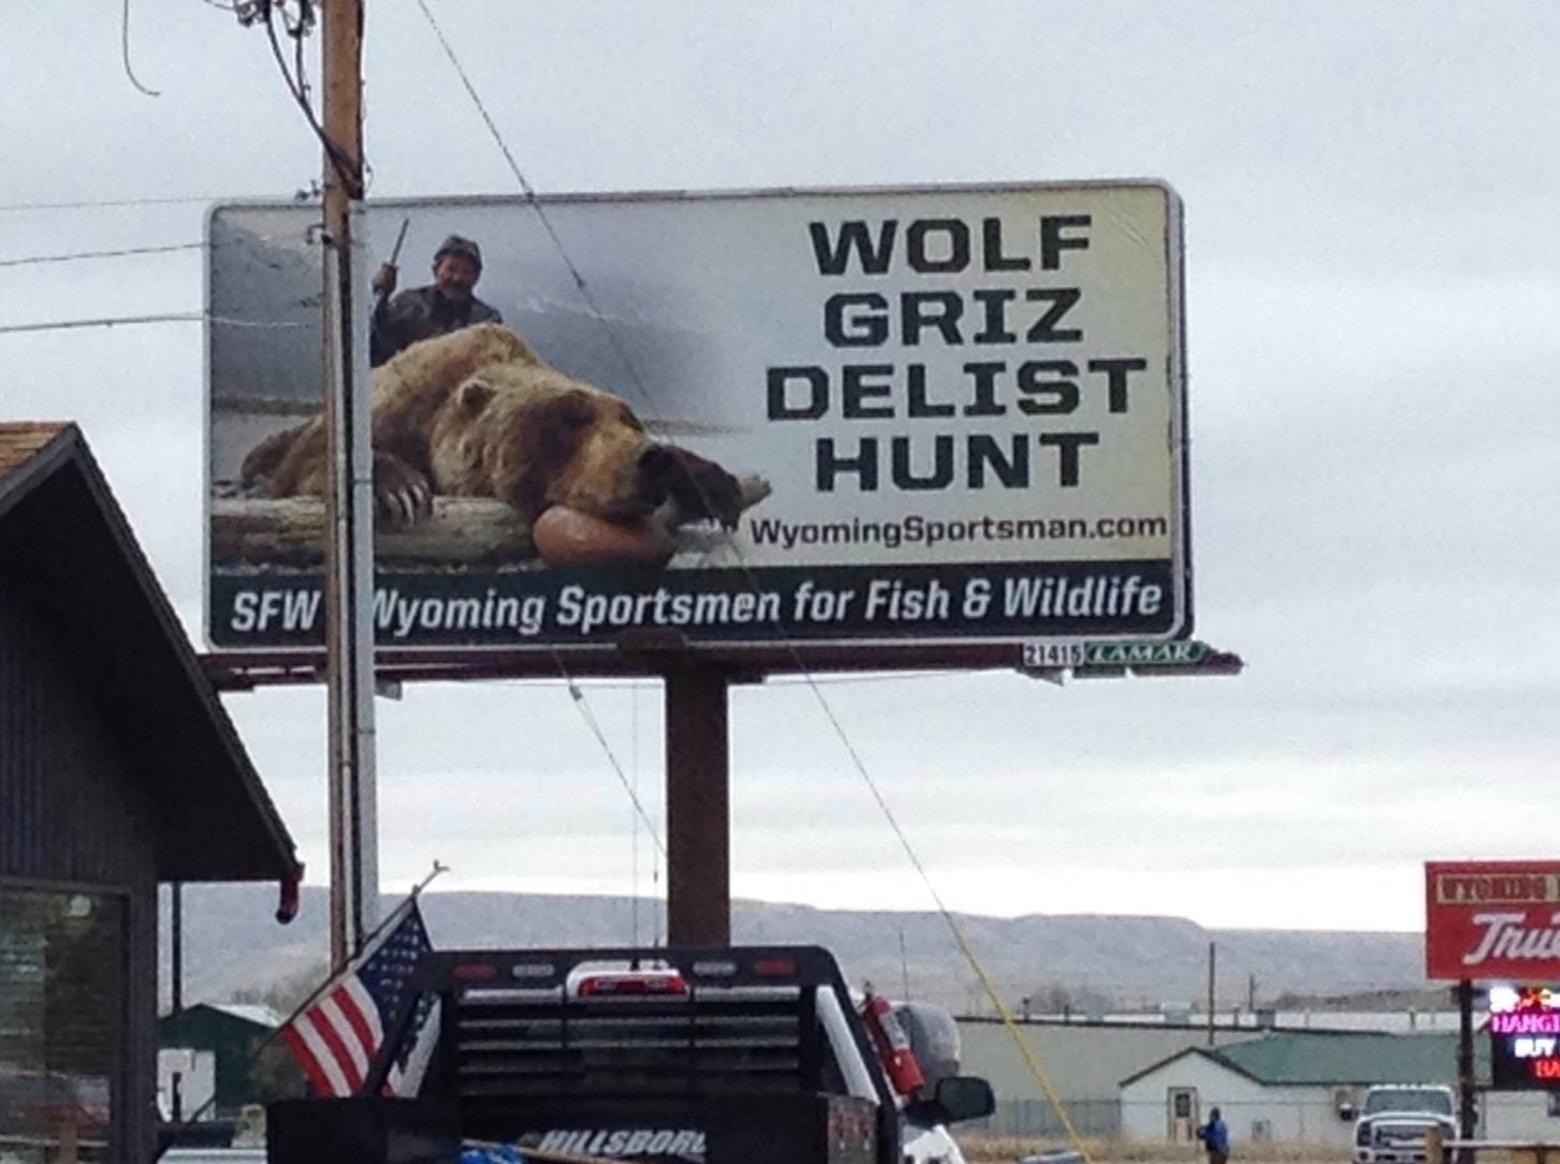 Another version of the billboard that went up in Cody.